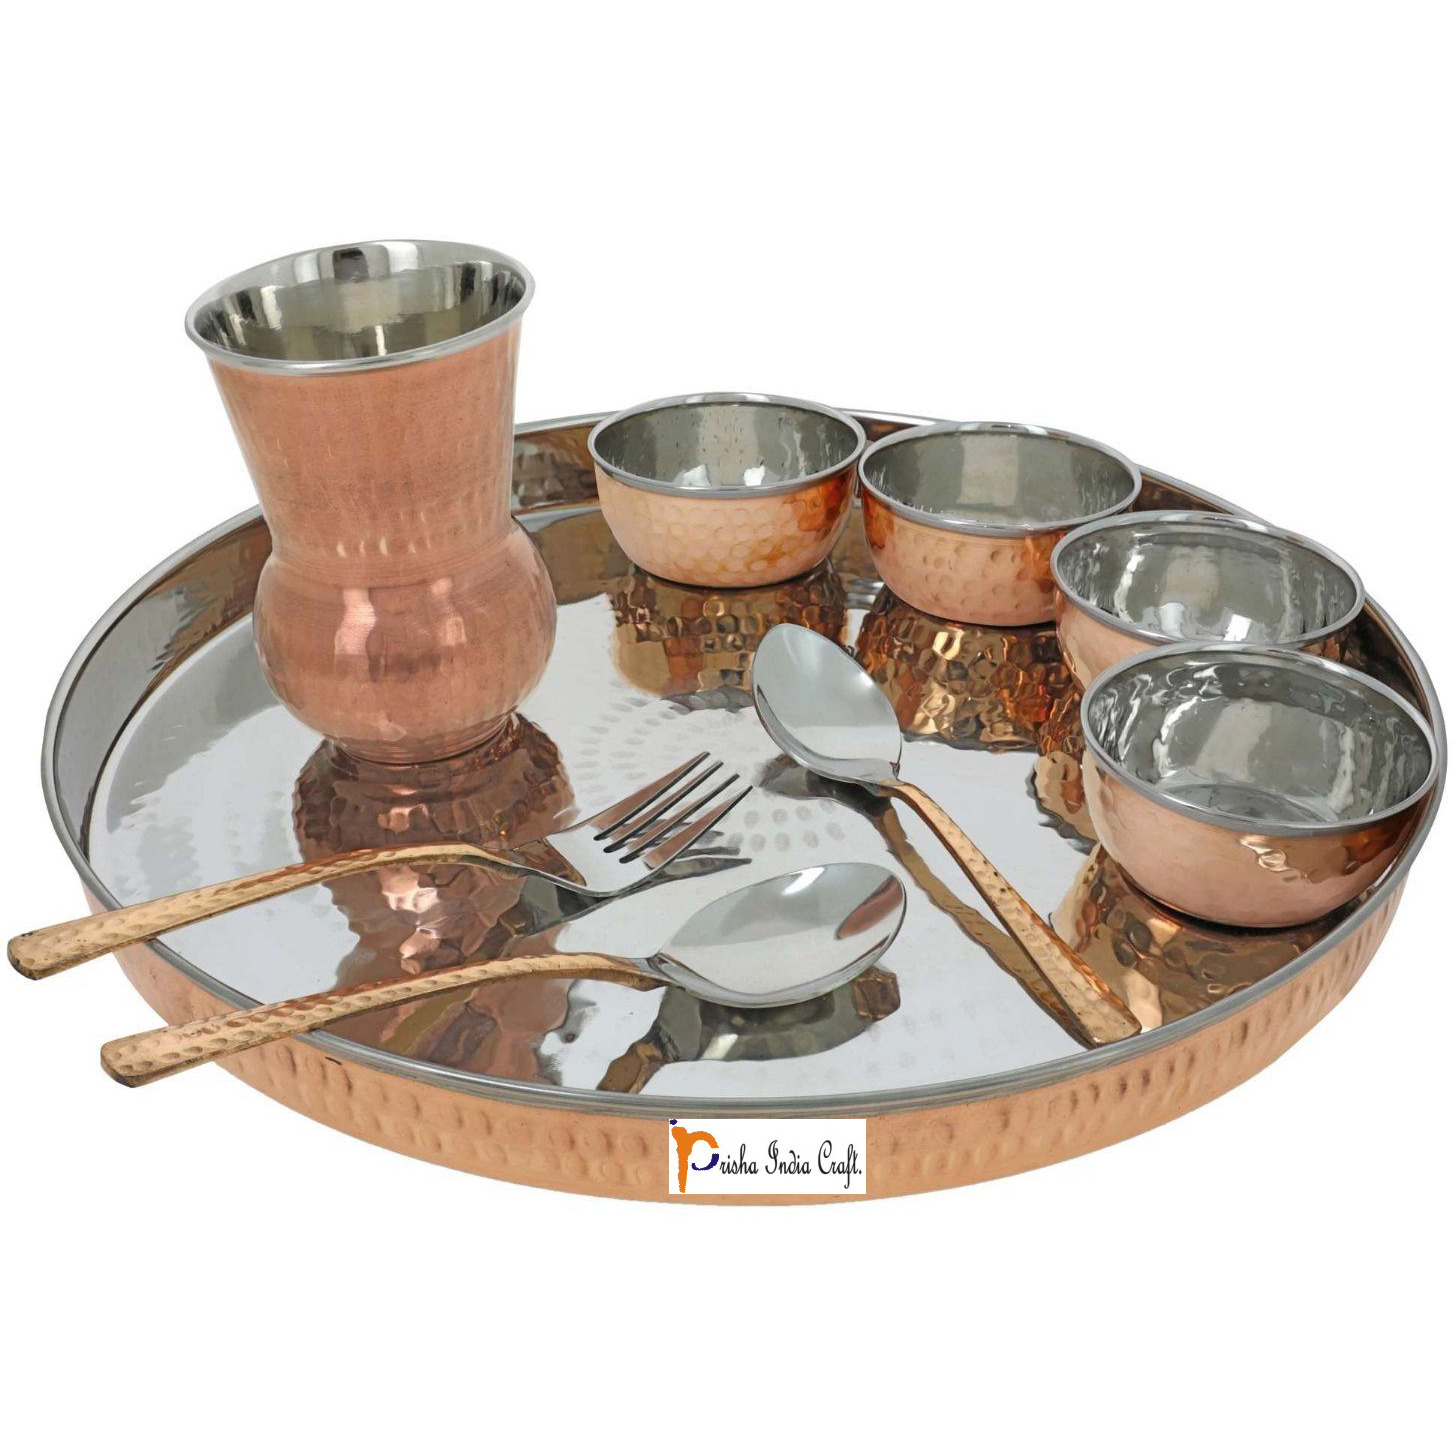 Prisha India Craft B. Set of 3 Dinnerware Traditional Stainless Steel Copper Dinner Set of Thali Plate, Bowls, Glass and Spoons, Dia 13  With 1 Pure Copper Pitcher Jug - Christmas Gift